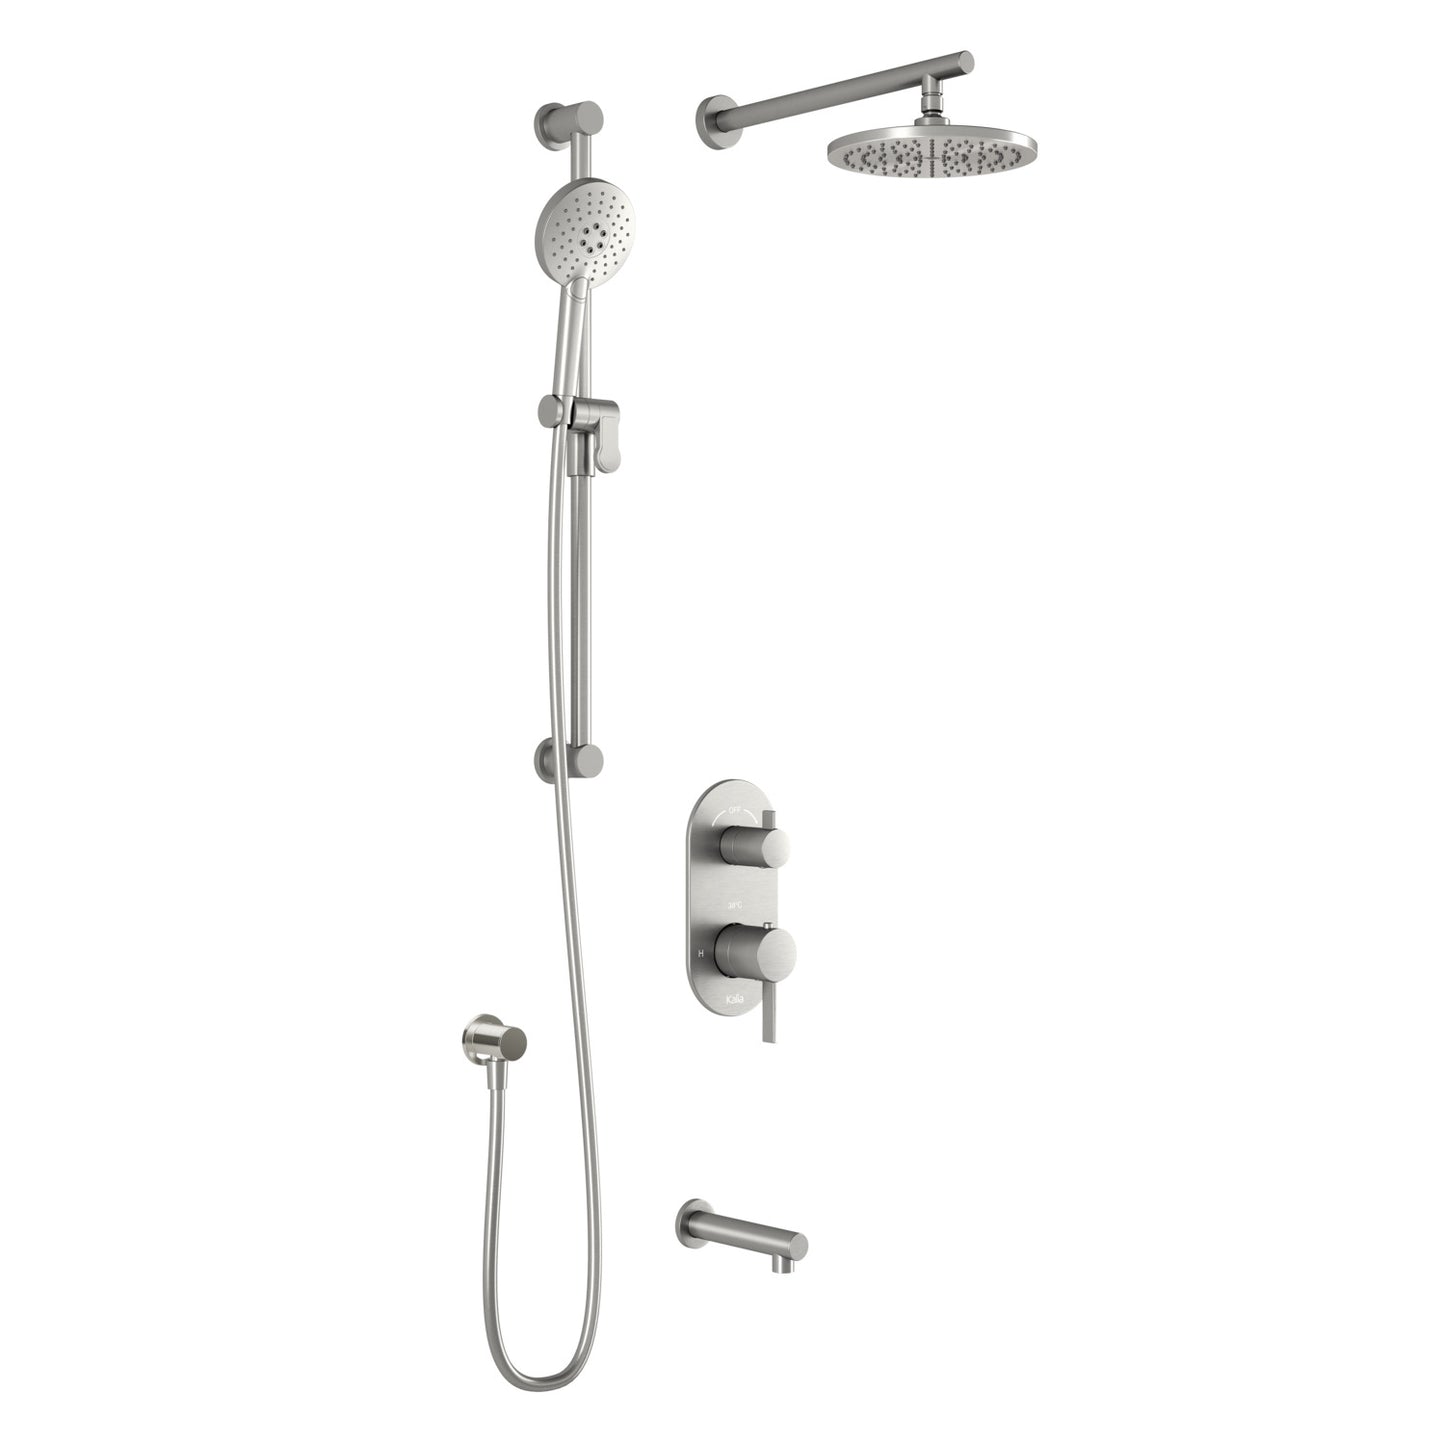 Kalia RoundOne TD3 : AQUATONIK T/P with Diverter Shower System with 9" Round Shower Head with Wall Arm (BF1642)